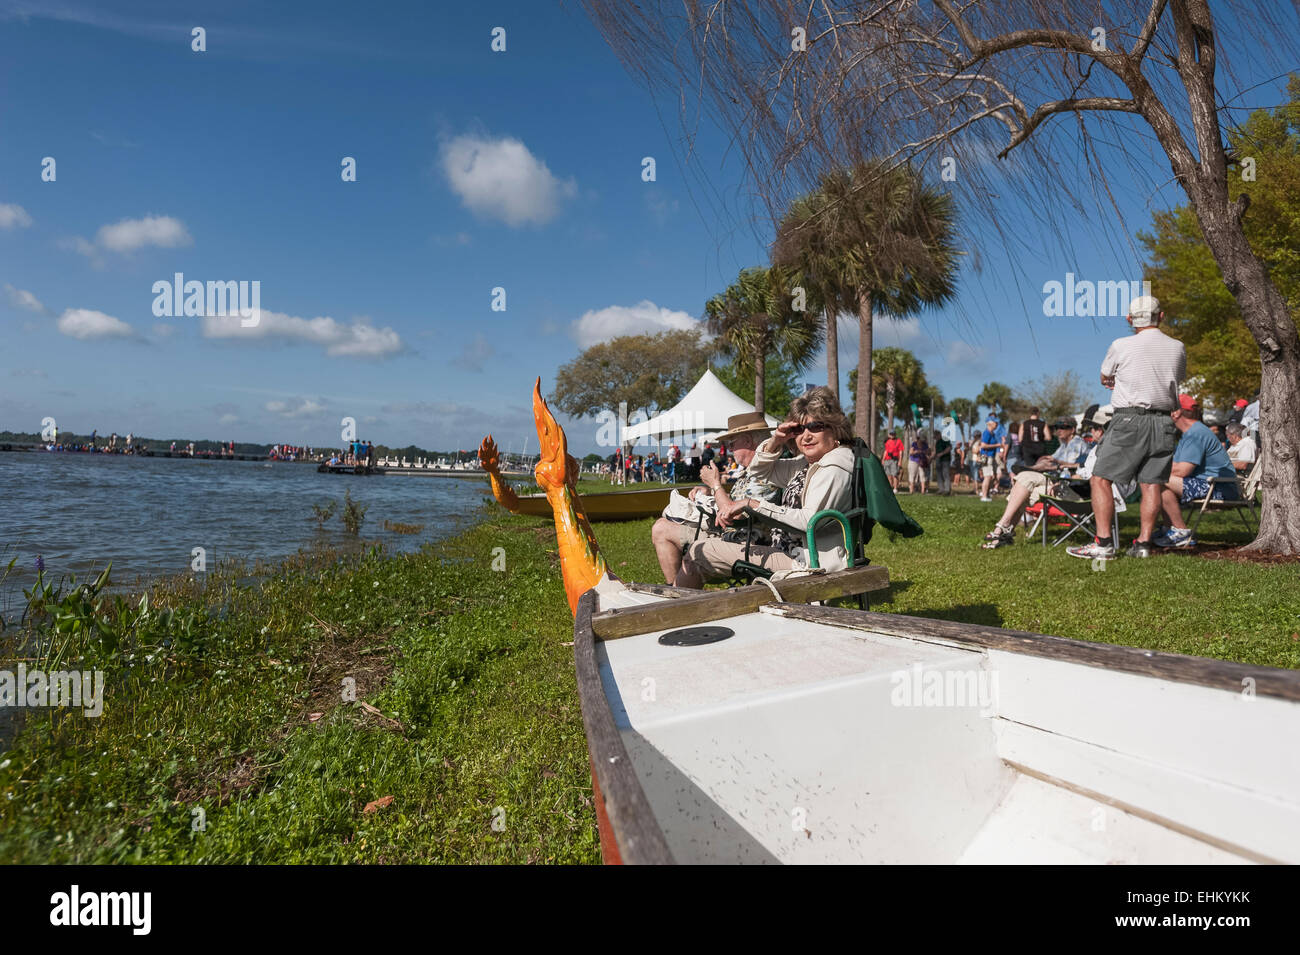 Dragon Boat Racing event al Parco Wooton in Tavares, Florida USA Foto Stock